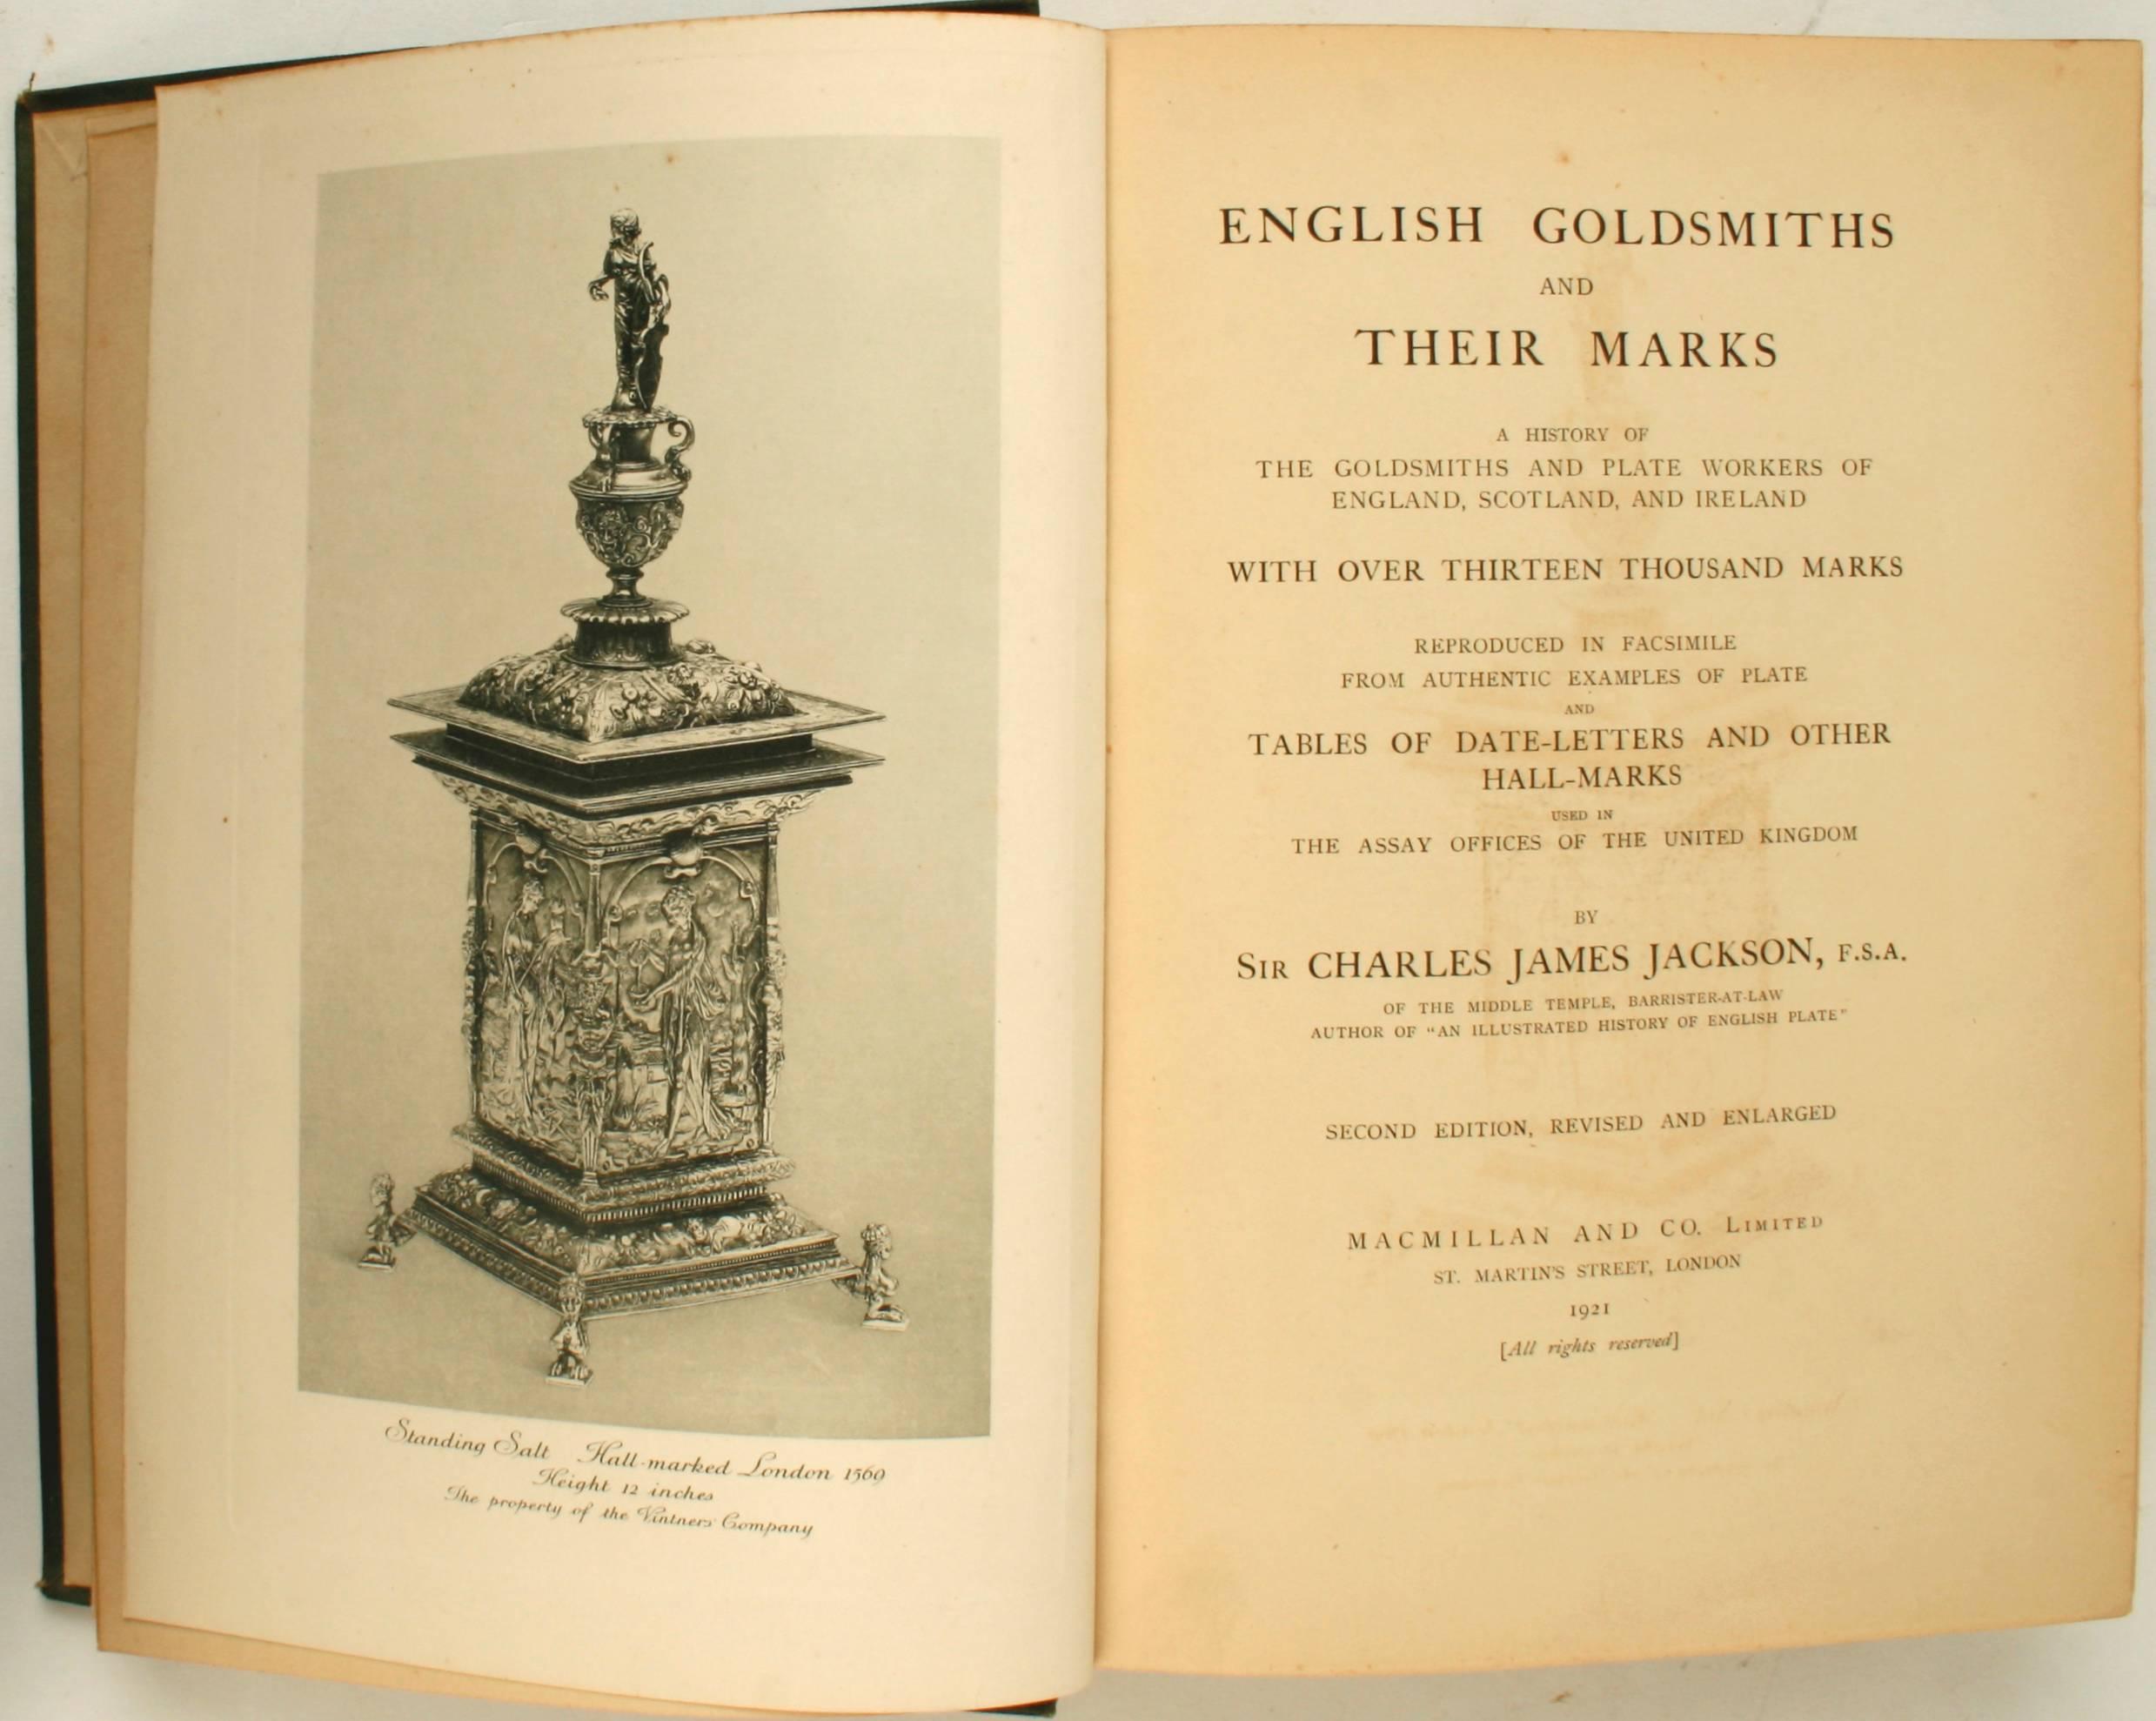 English Goldsmiths and Their Marks by Sir Charles J. Jackson. London: Macmillan and Co. Ltd., 1921. Second edition hardcover with no dust jacket. 747 pp. A history of goldsmiths and plate workers of England, Scotland and Ireland. The book contains